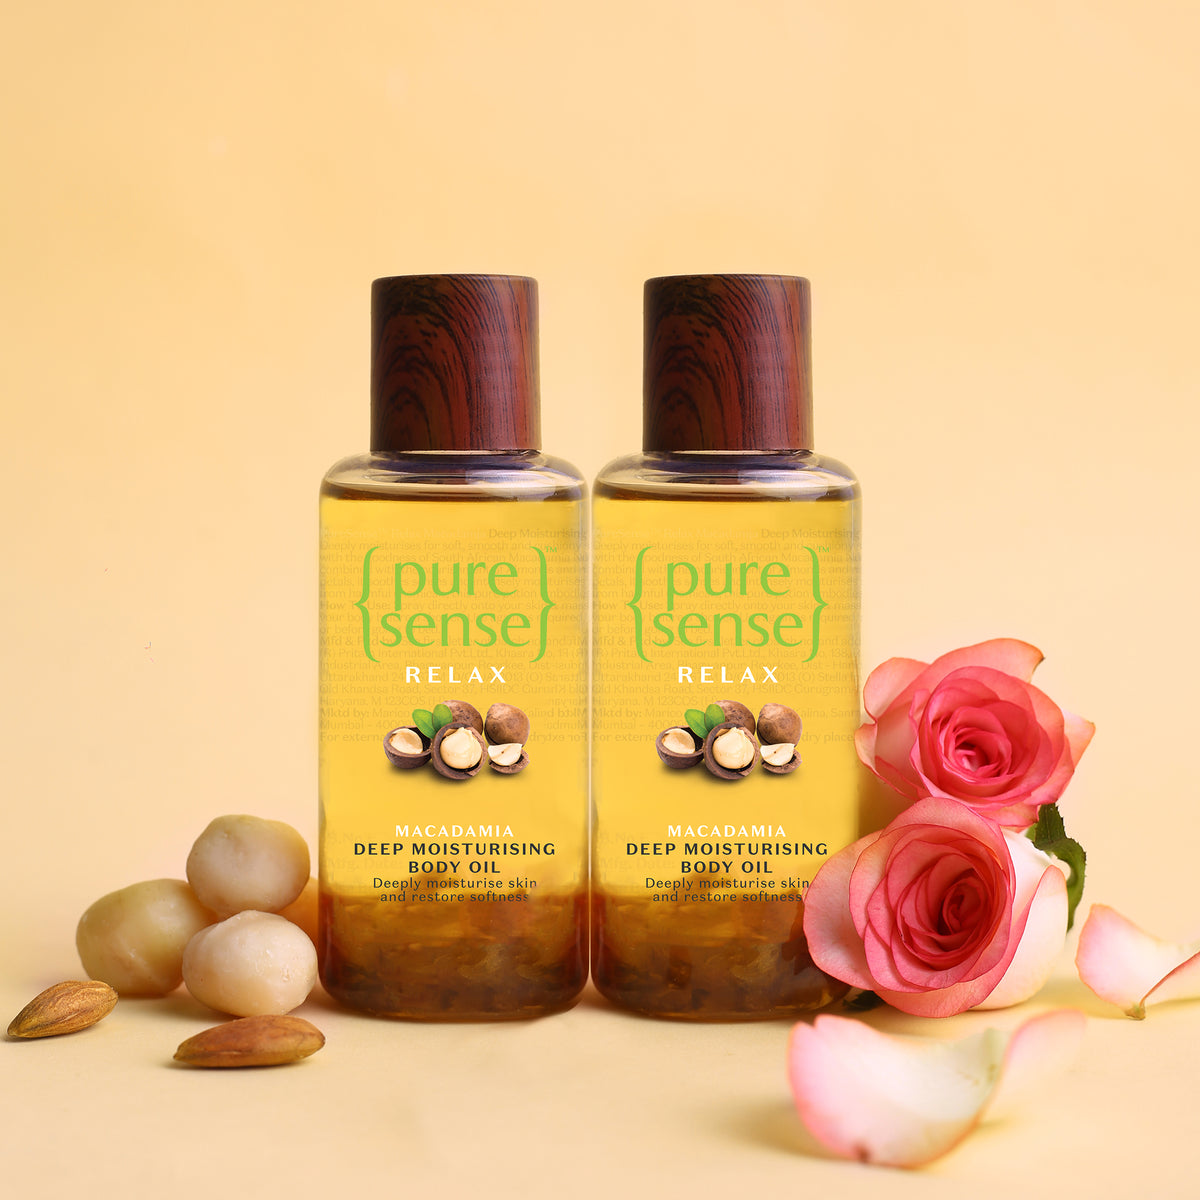 Relaxing Macadamia Deep Moisturising Body Oil (Pack of 2) |  From the makers of Parachute Advansed | 200ml - PureSense